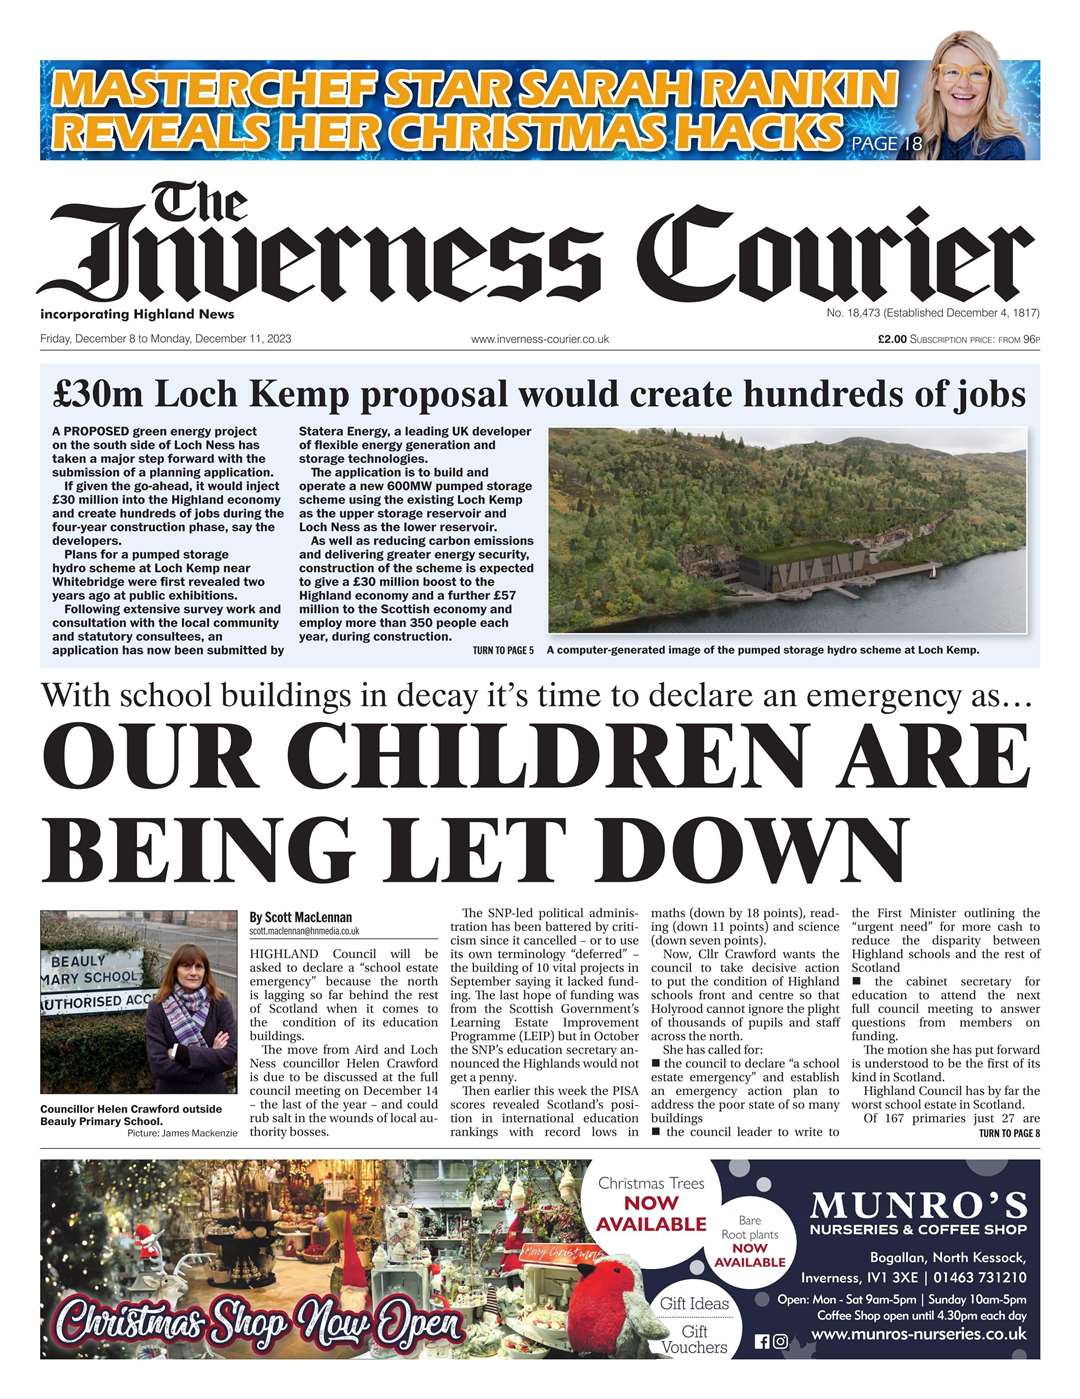 The Inverness Courier, December 8, front page.